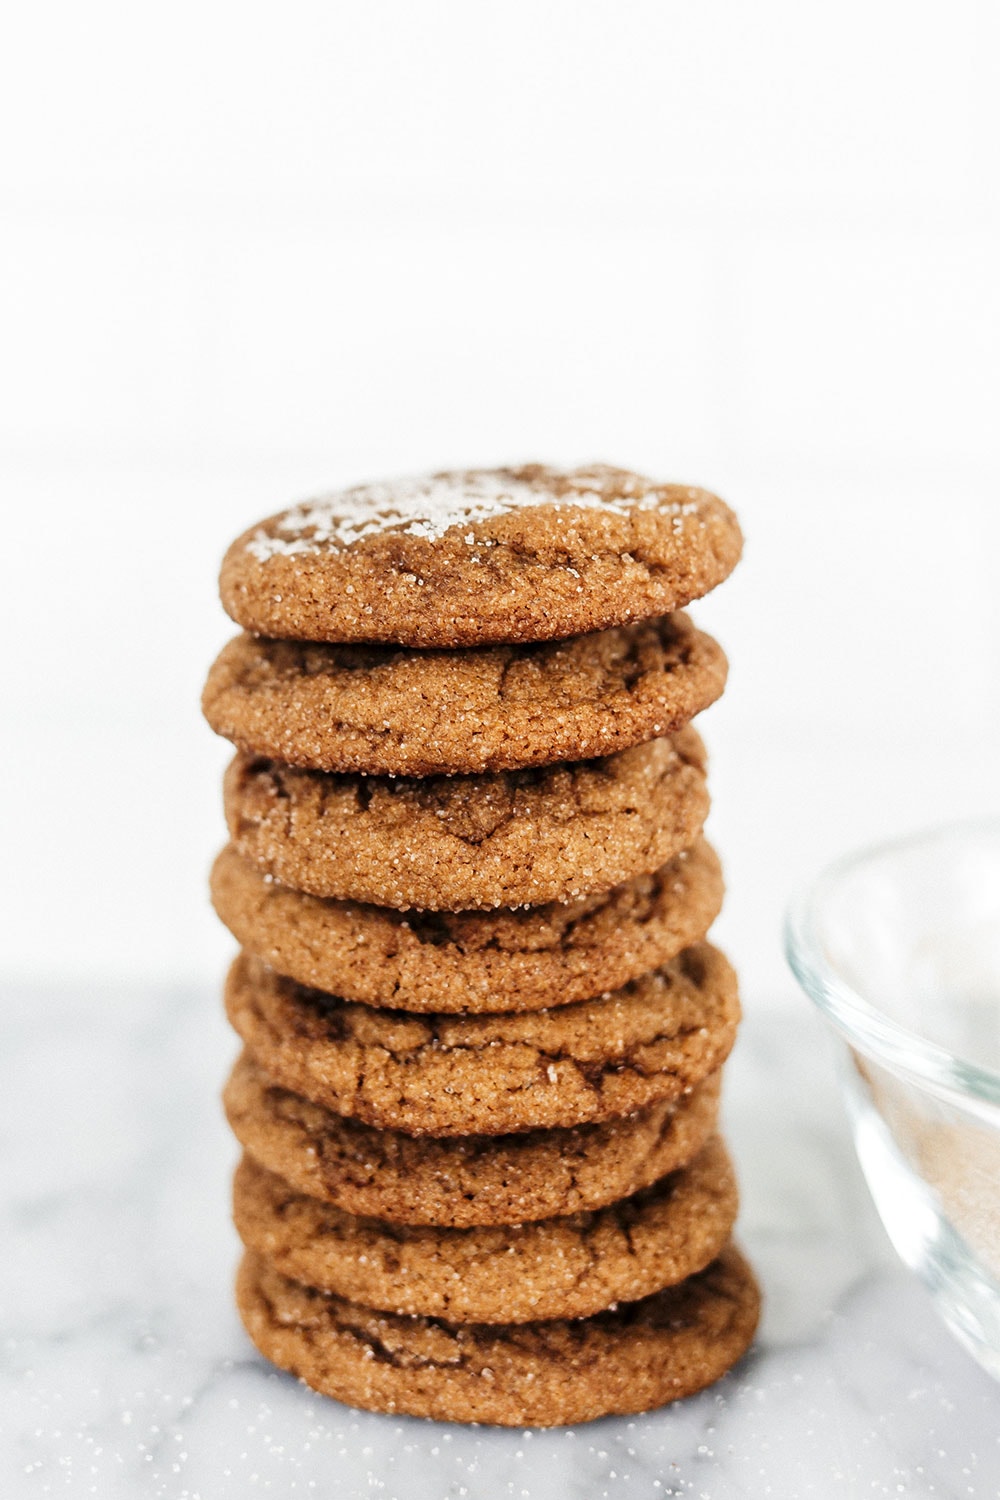  The perfect combination of snickerdoodle and gingersnap, these Gingerdoodle cookies are puffy and soft and filled with warm spices. Cookie baking make-ahead and storage tips included.